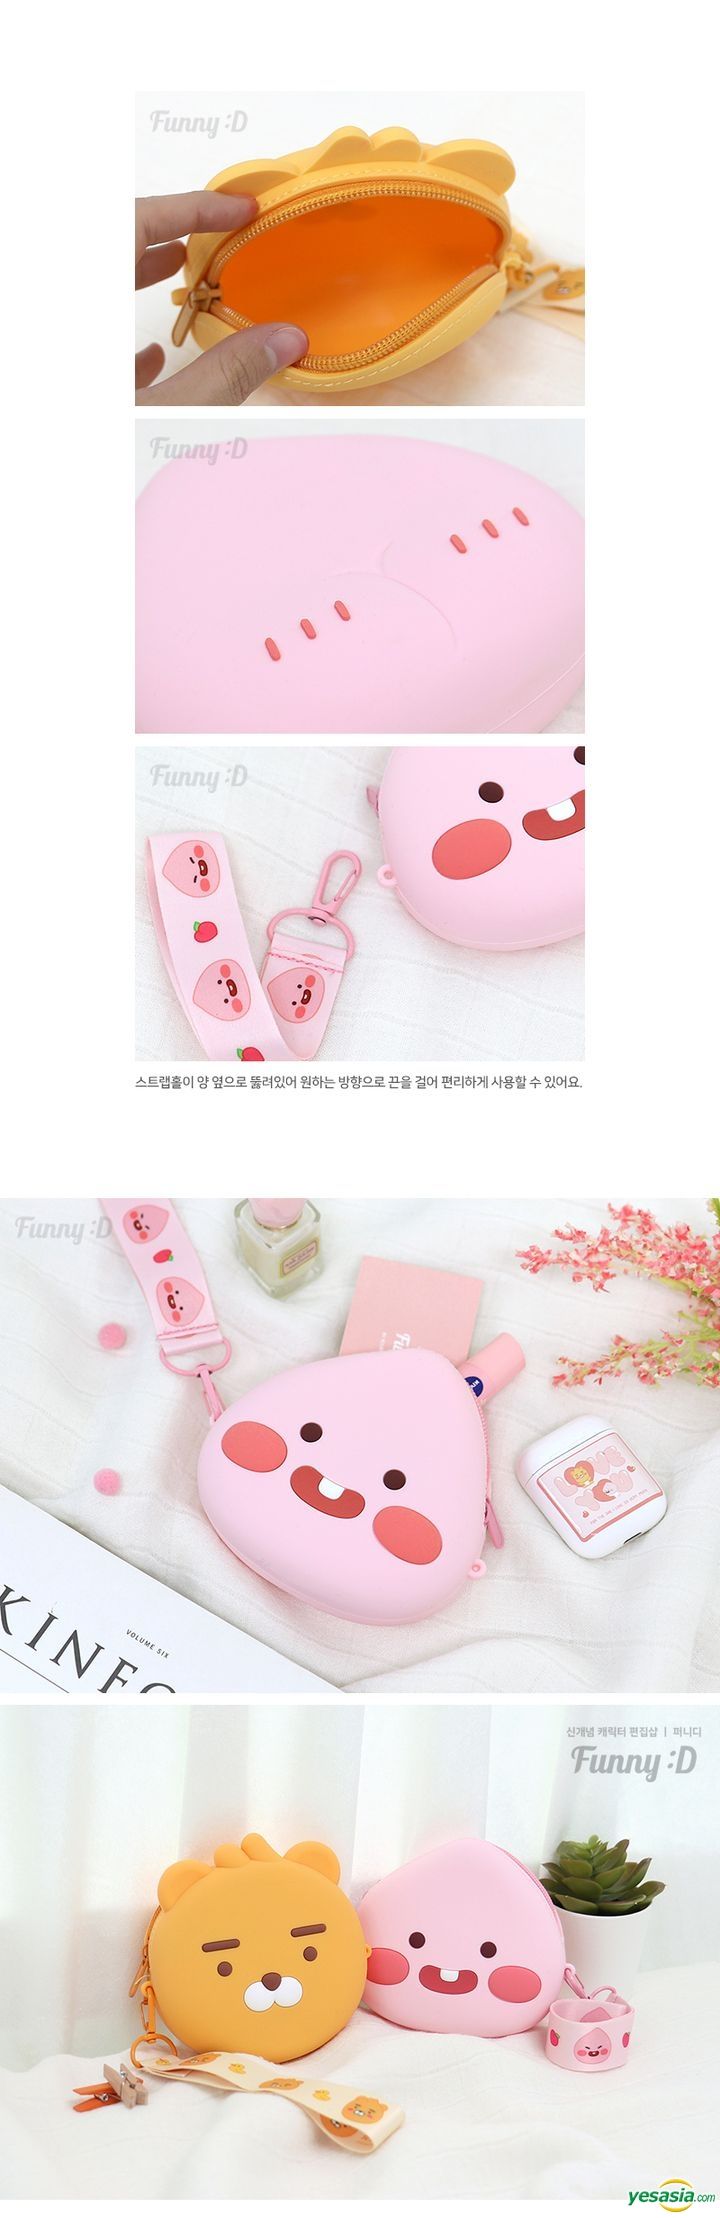 Yesasia Image Gallery Kakao Friends Little Silicon Face Pouch Apeach 6610